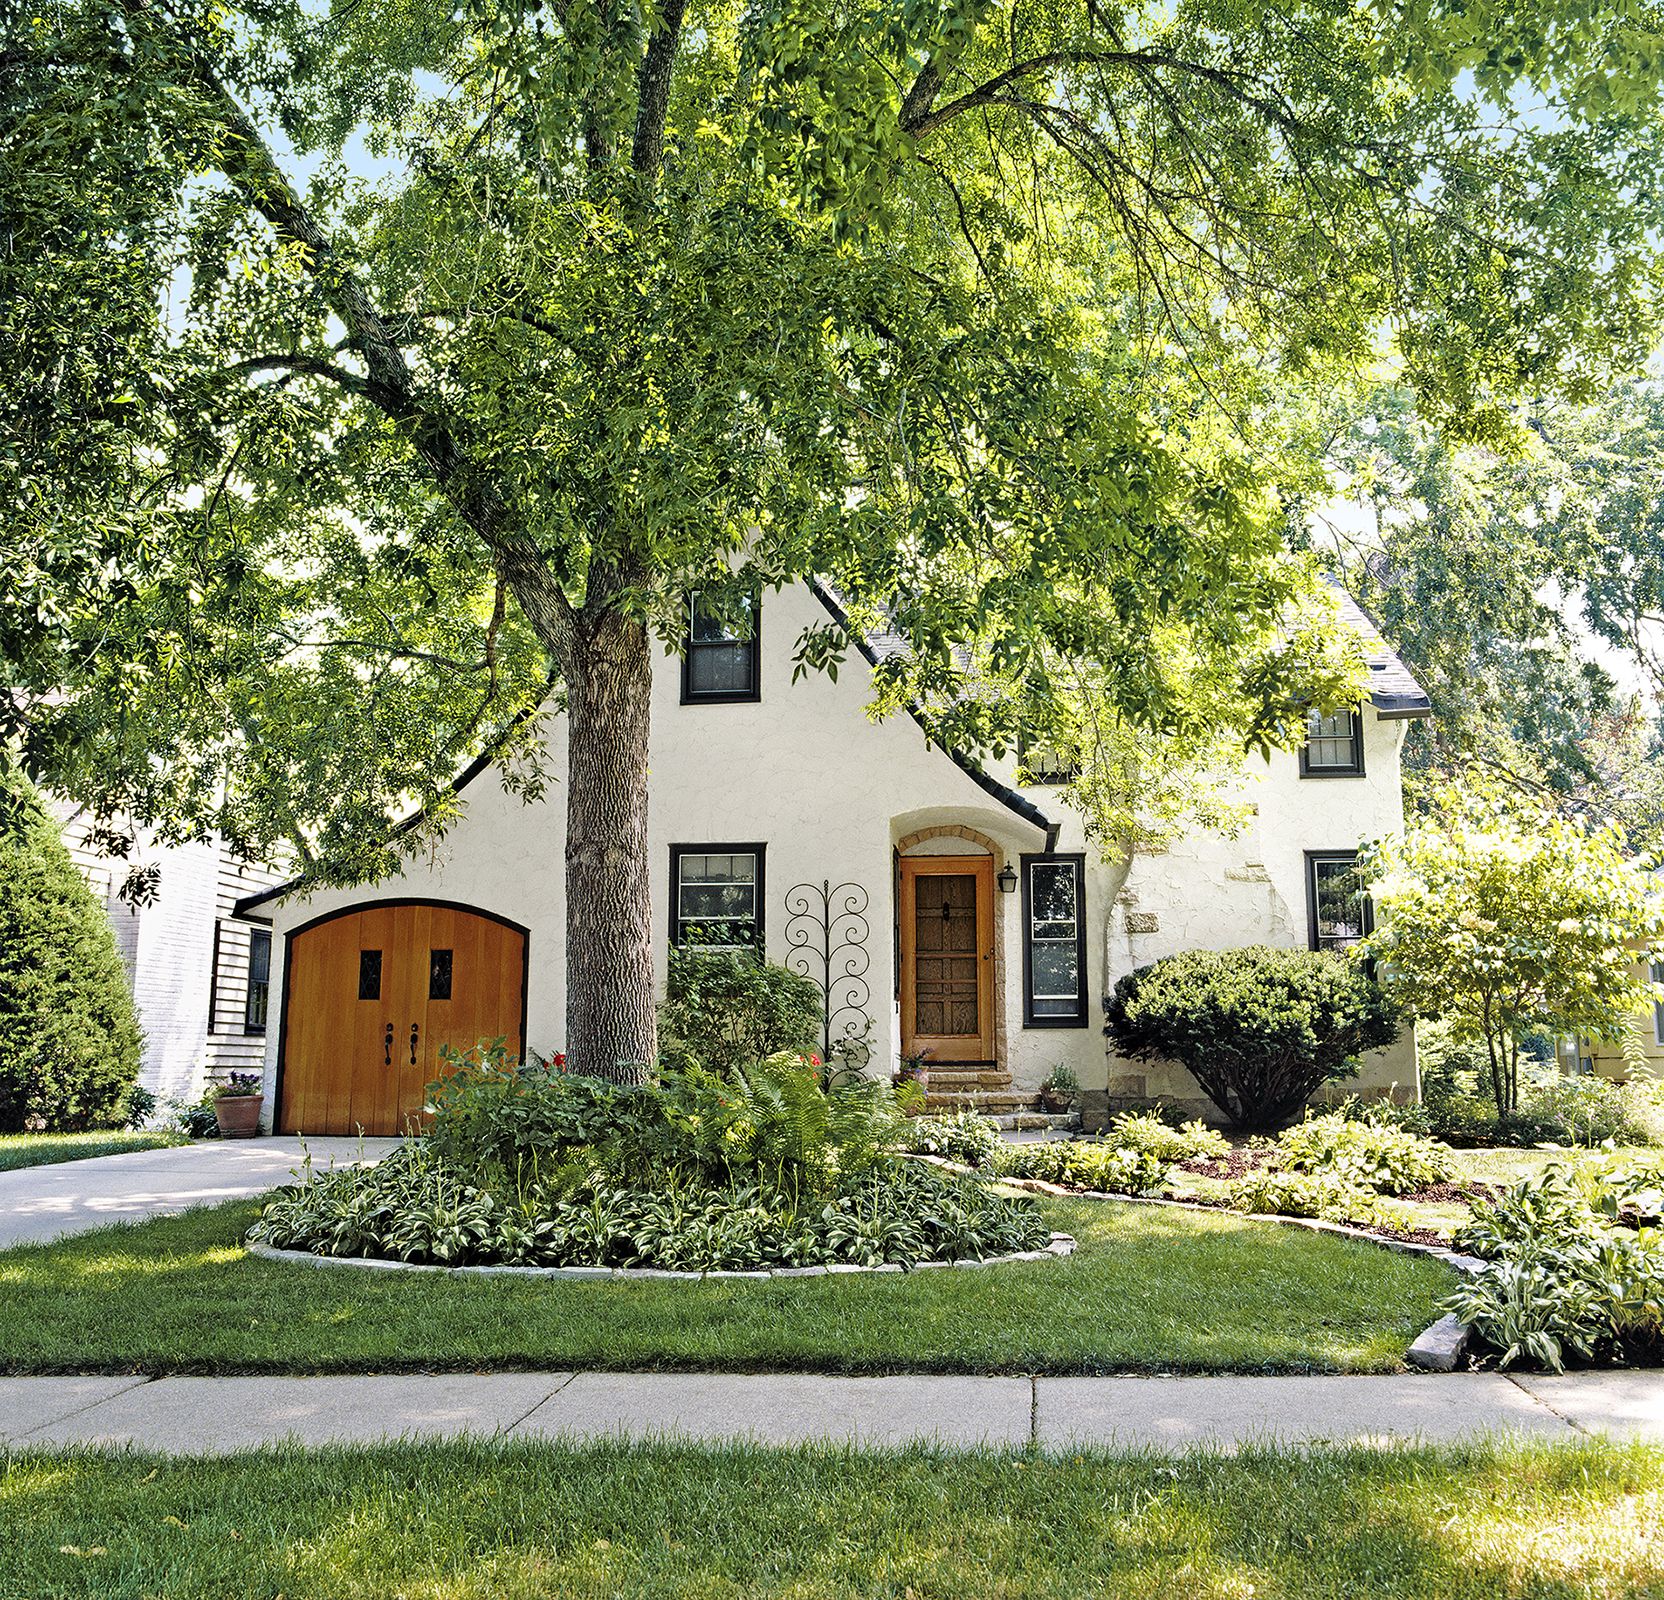 All About Shade Trees - This Old House